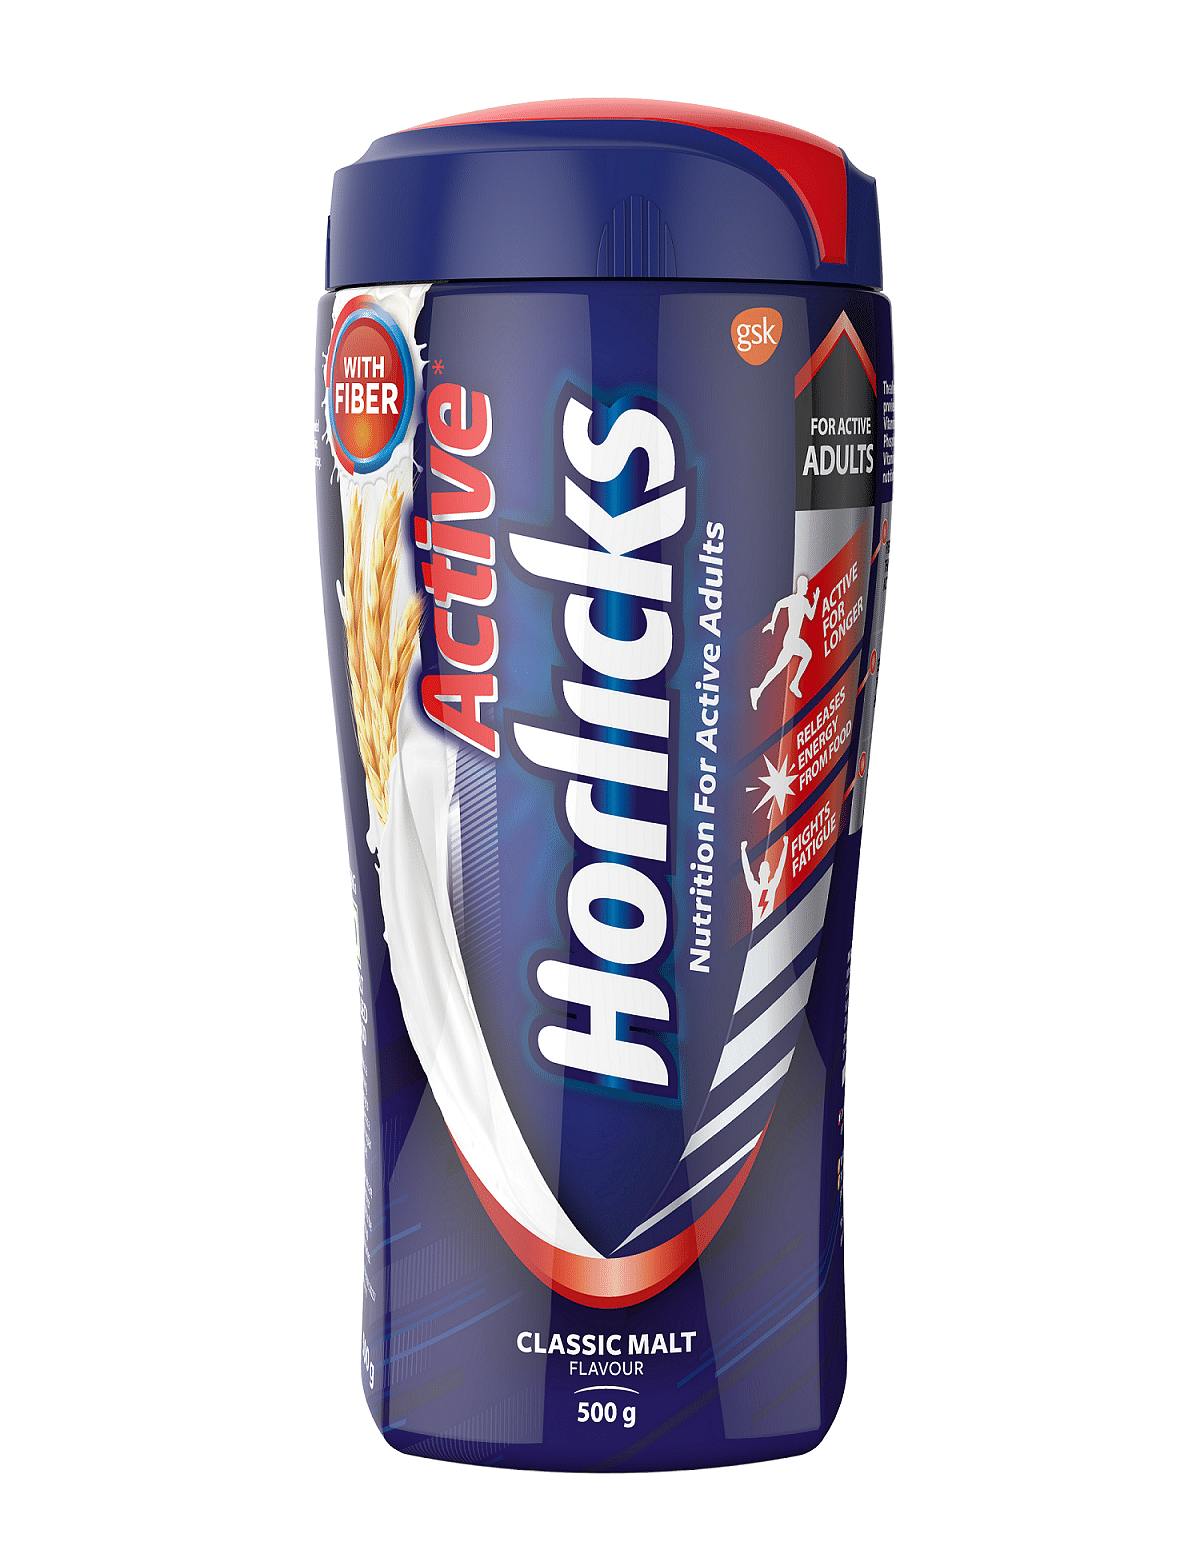 GSK Consumer Healthcare launches Active Horlicks to combat low energy and fatigue in adults